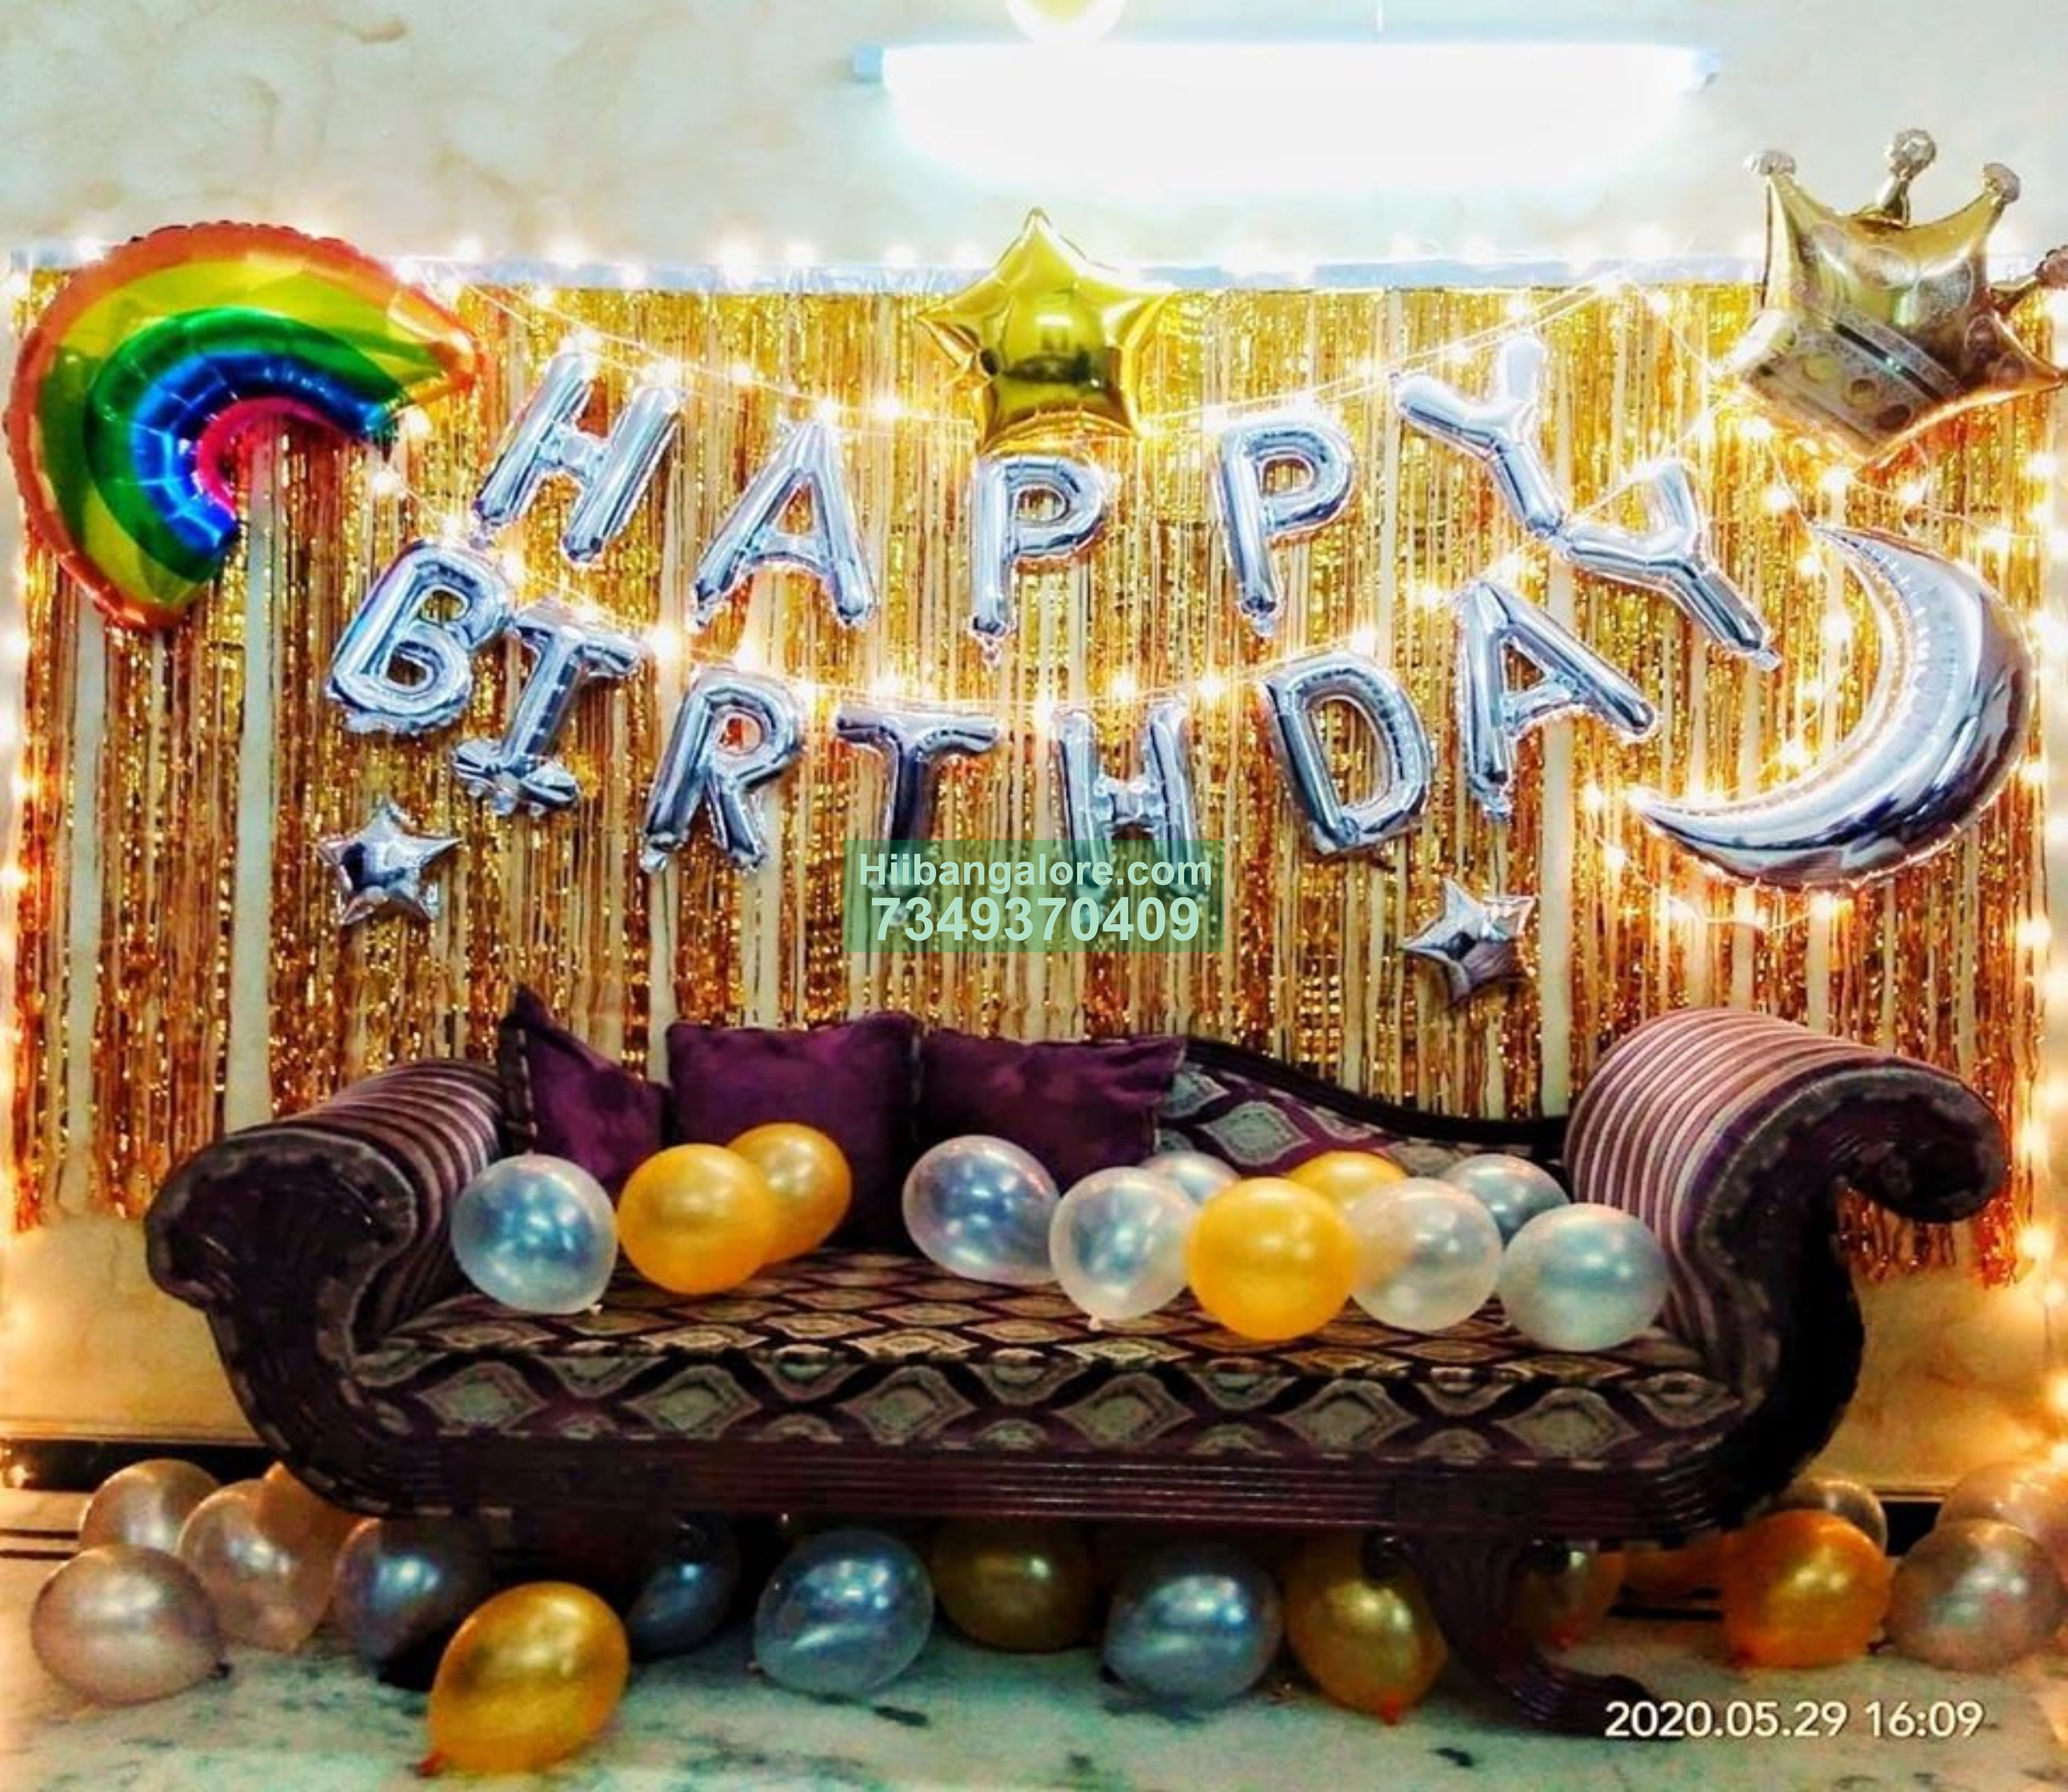 home-balloon-decorations-best-birthday-party-organisers-balloon-decorators-birthday-party